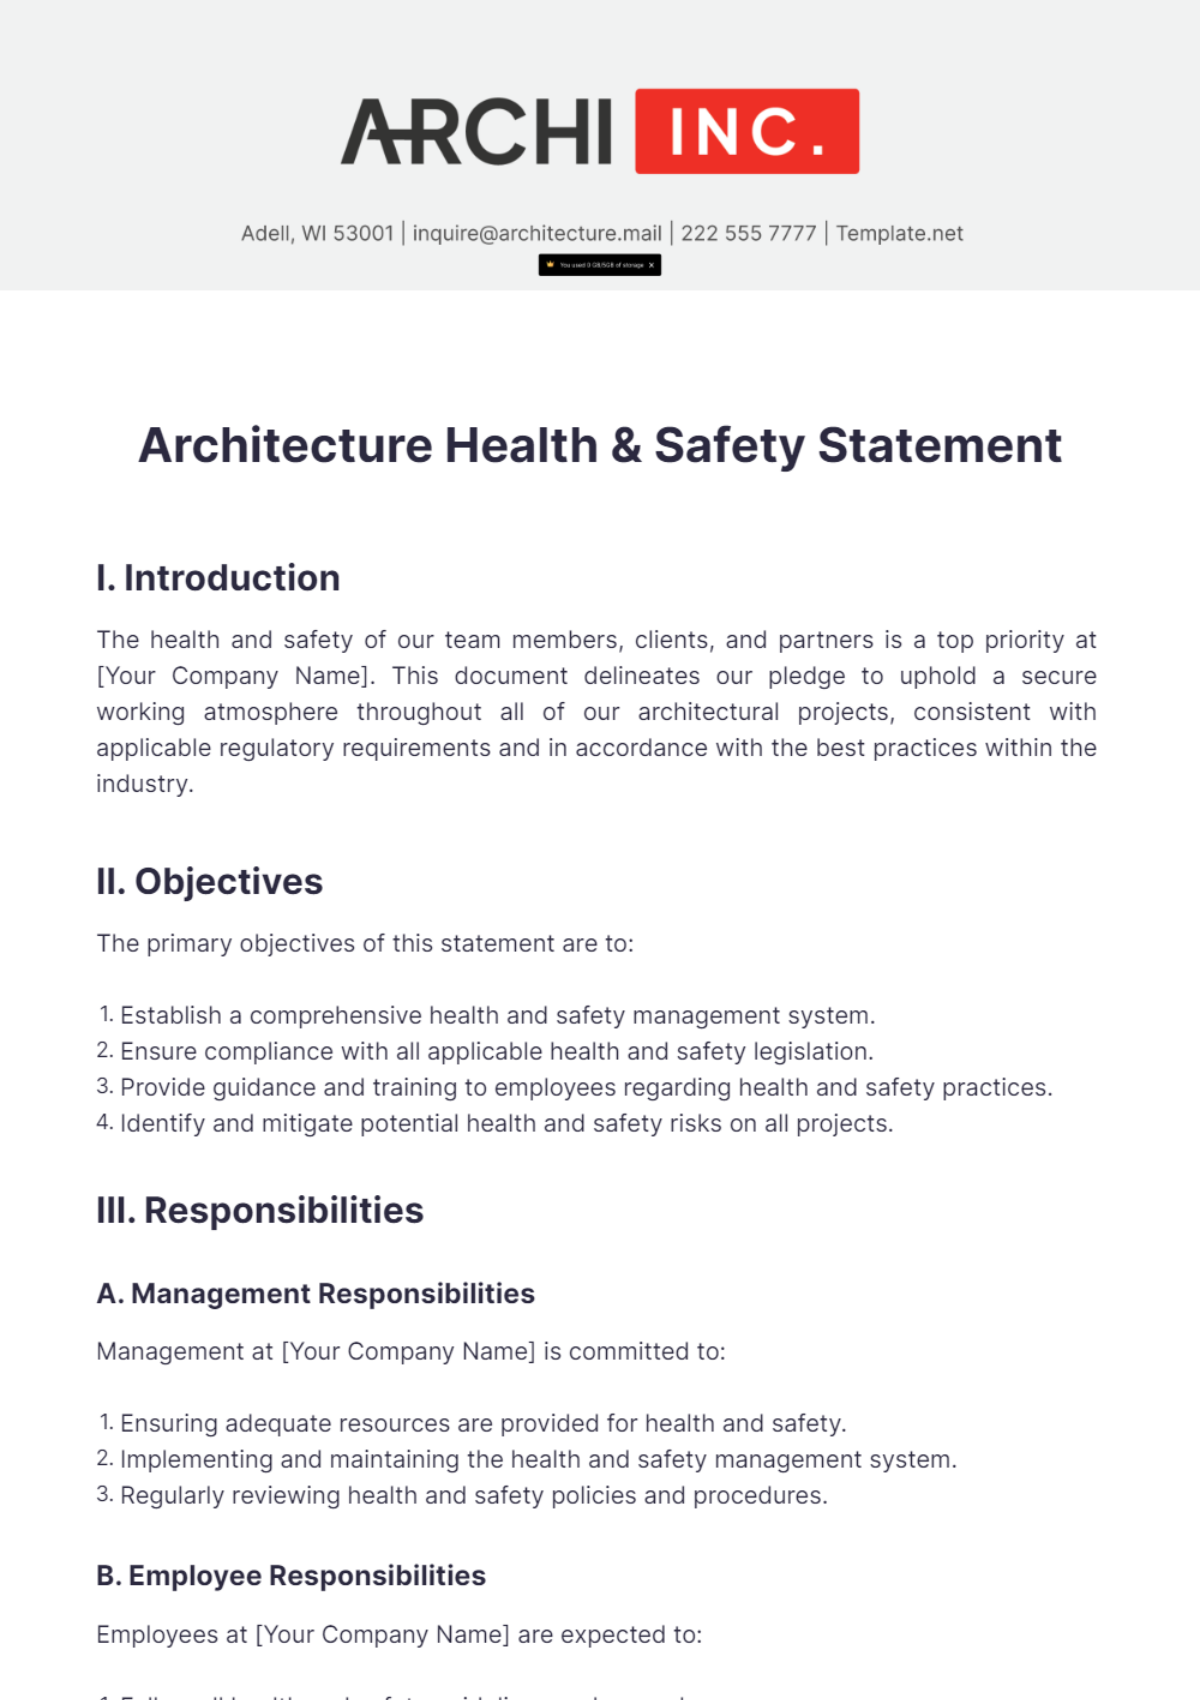 Free Architecture Health & Safety Statement Template